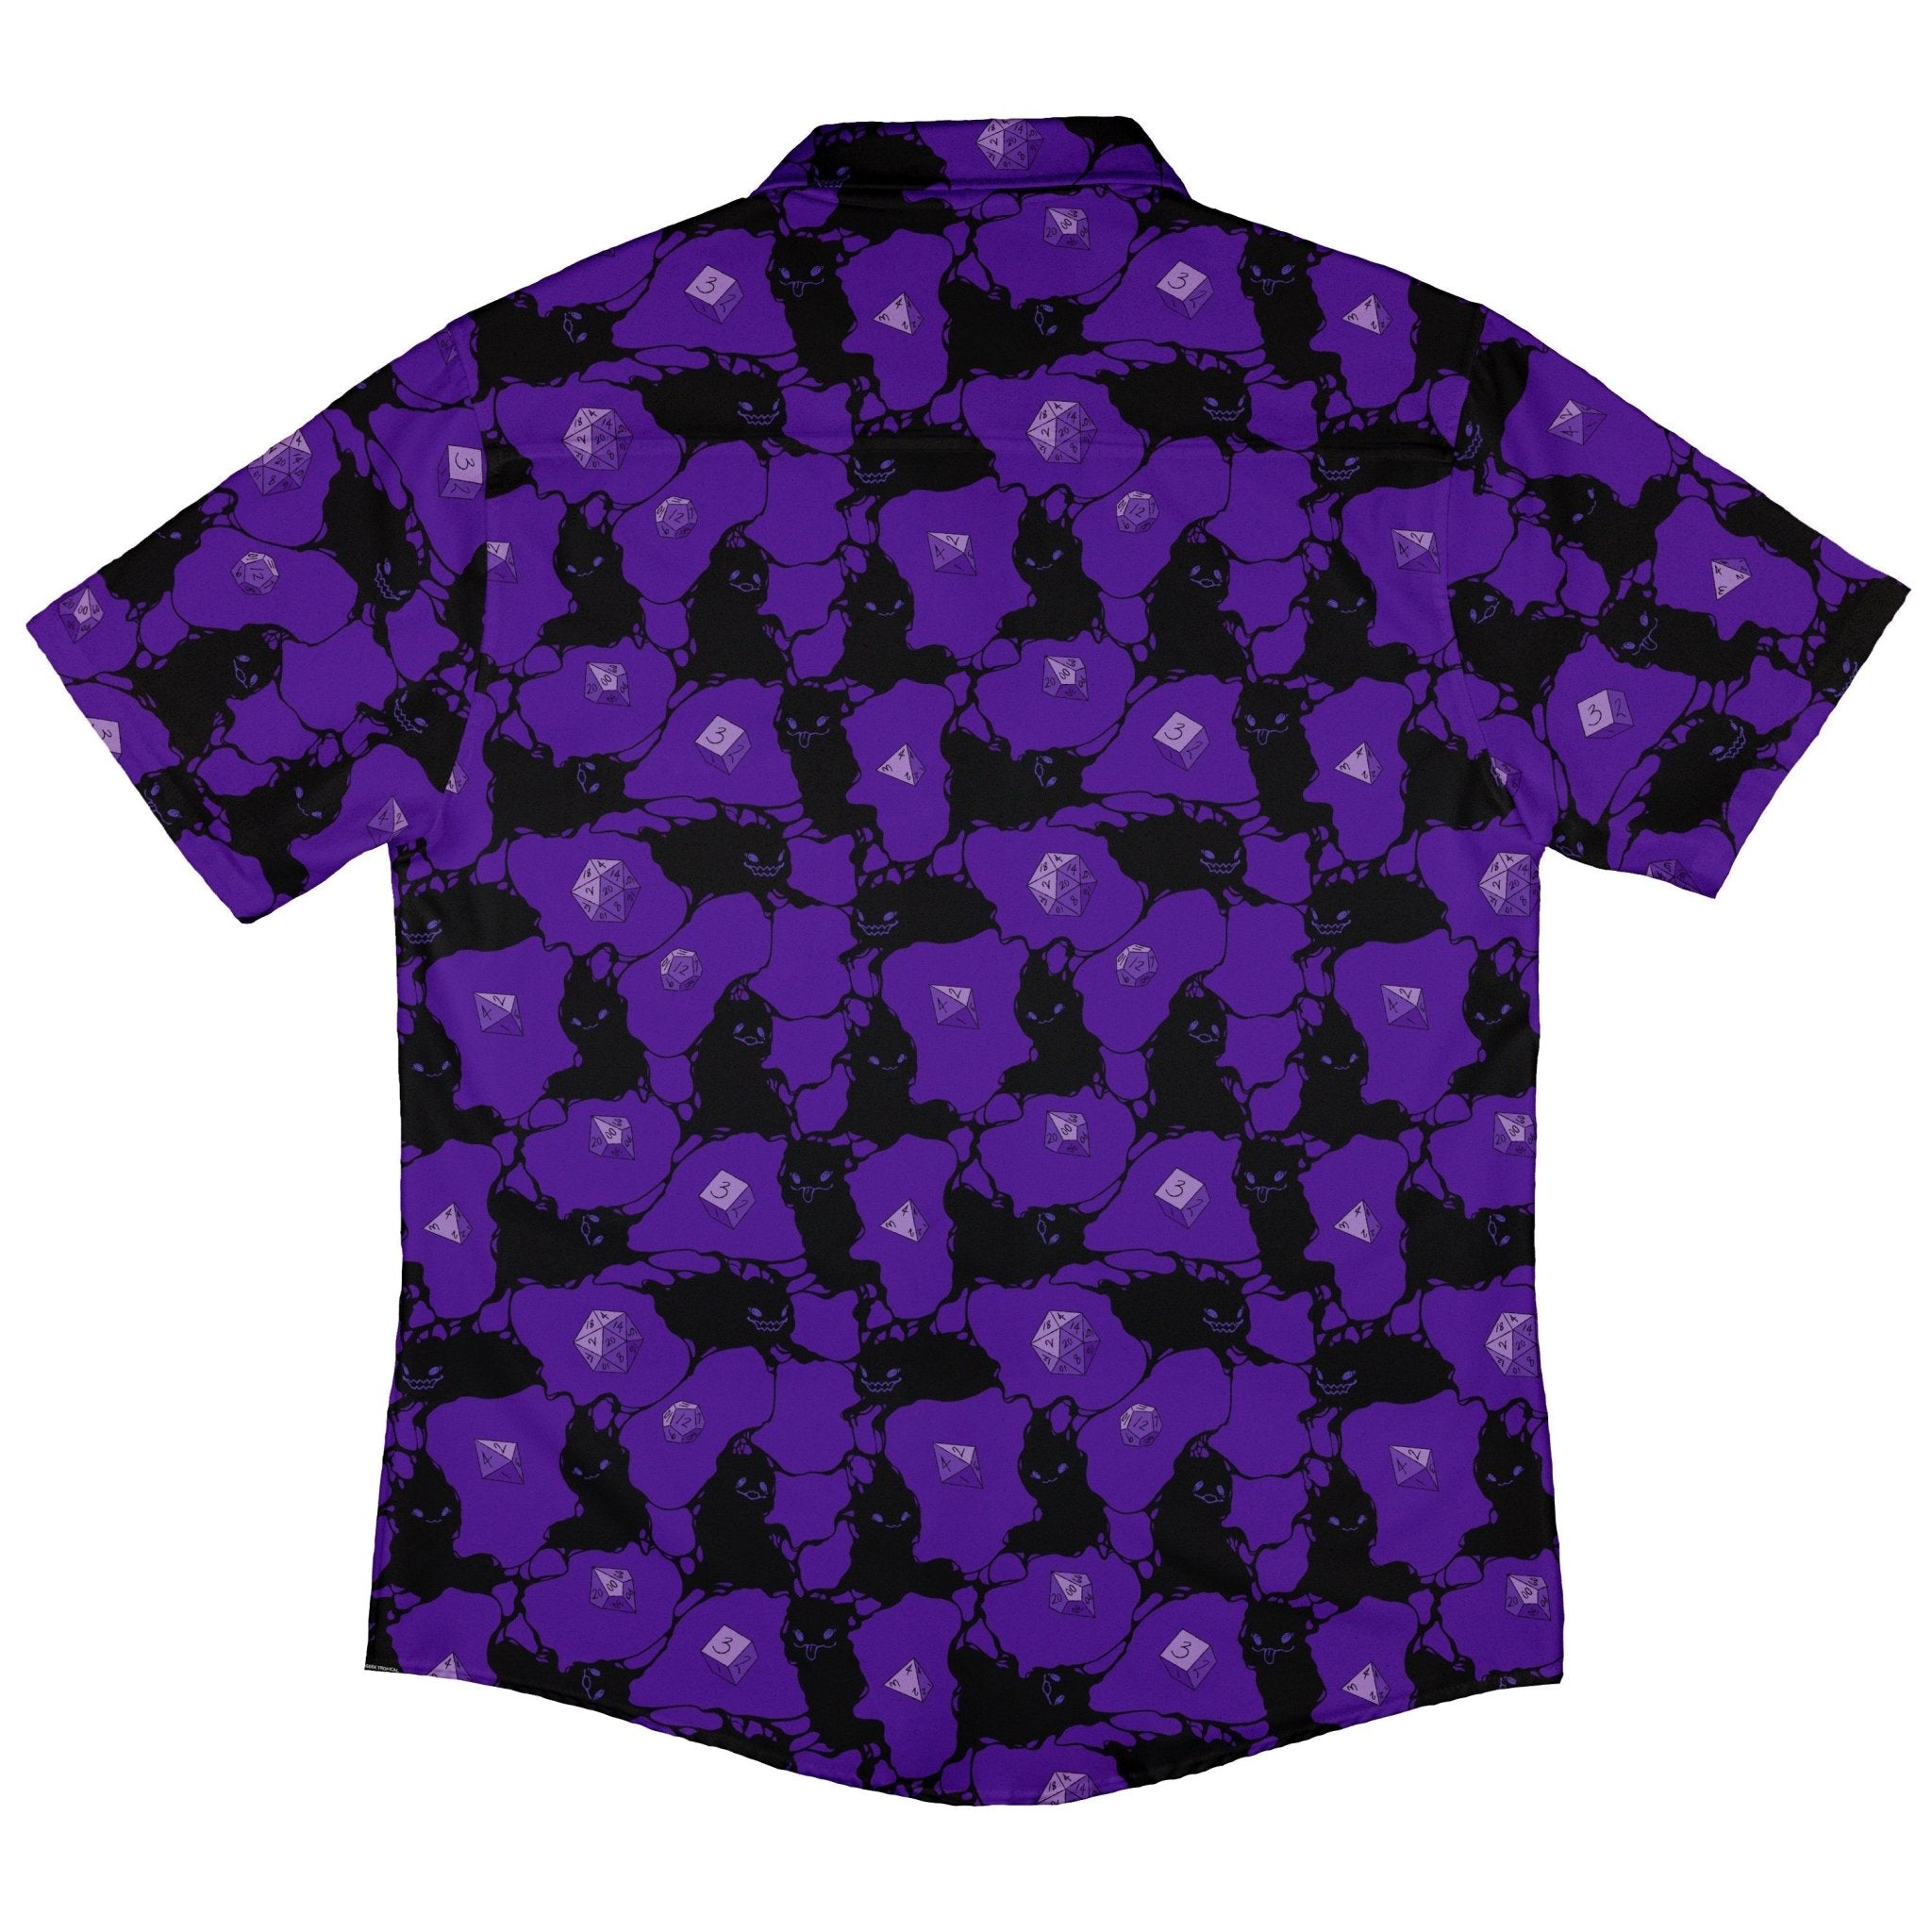 Dnd Inkling Familiars Button Up Shirt - adult sizing - Design by Ardi Tong - dnd & rpg print